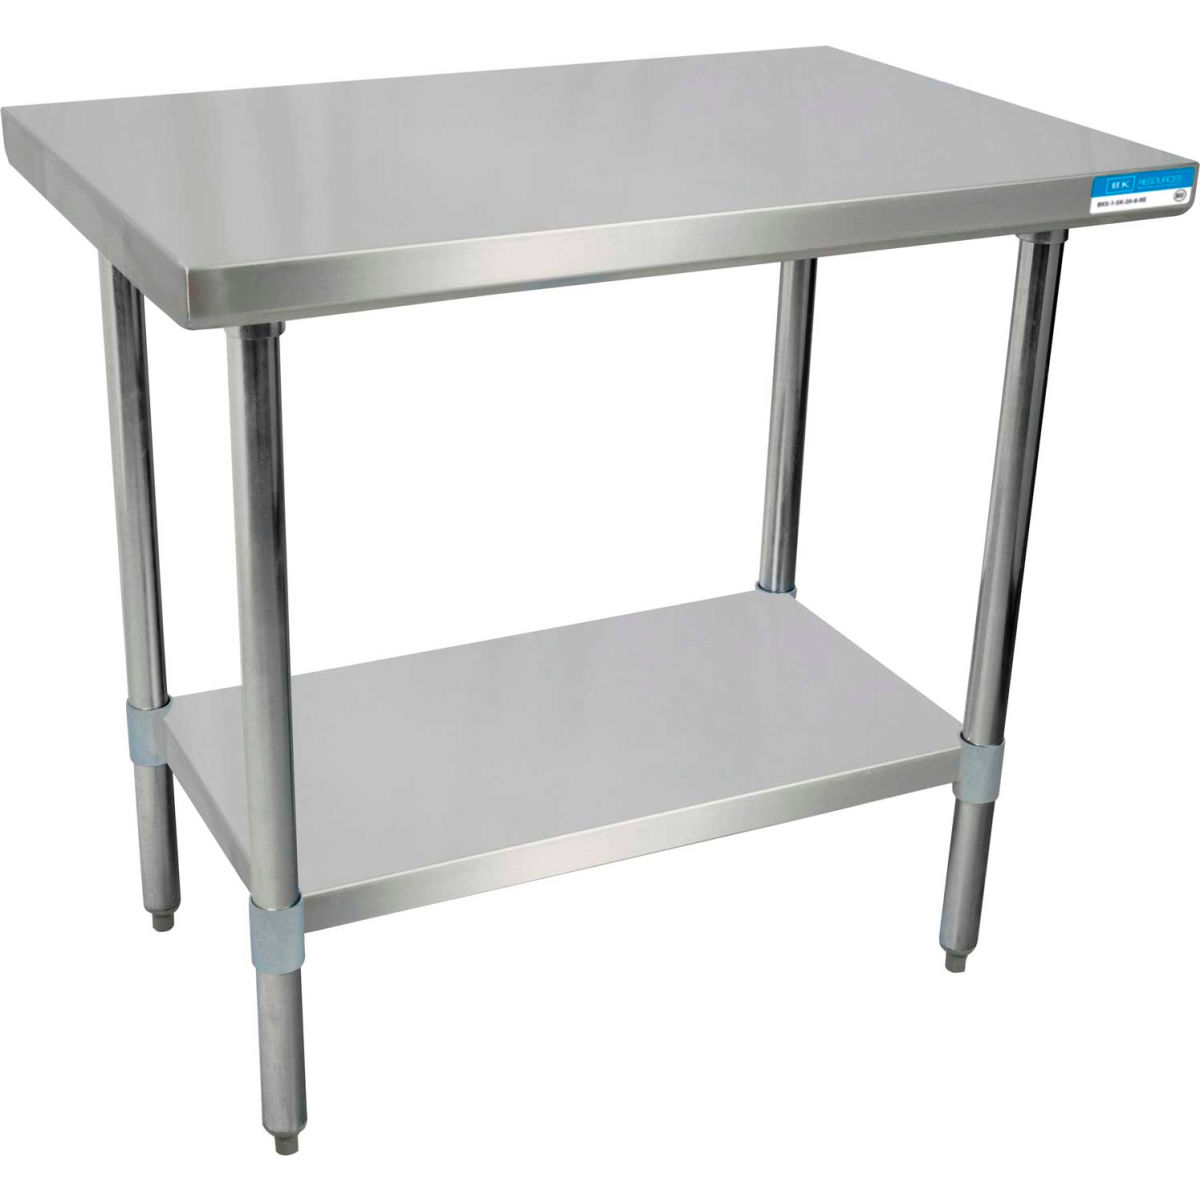 Picture of BK Resources B0899548 18 Gauge 430 Series Stainless Workbench with Adjustable Undershelf - 24 x 24 in.